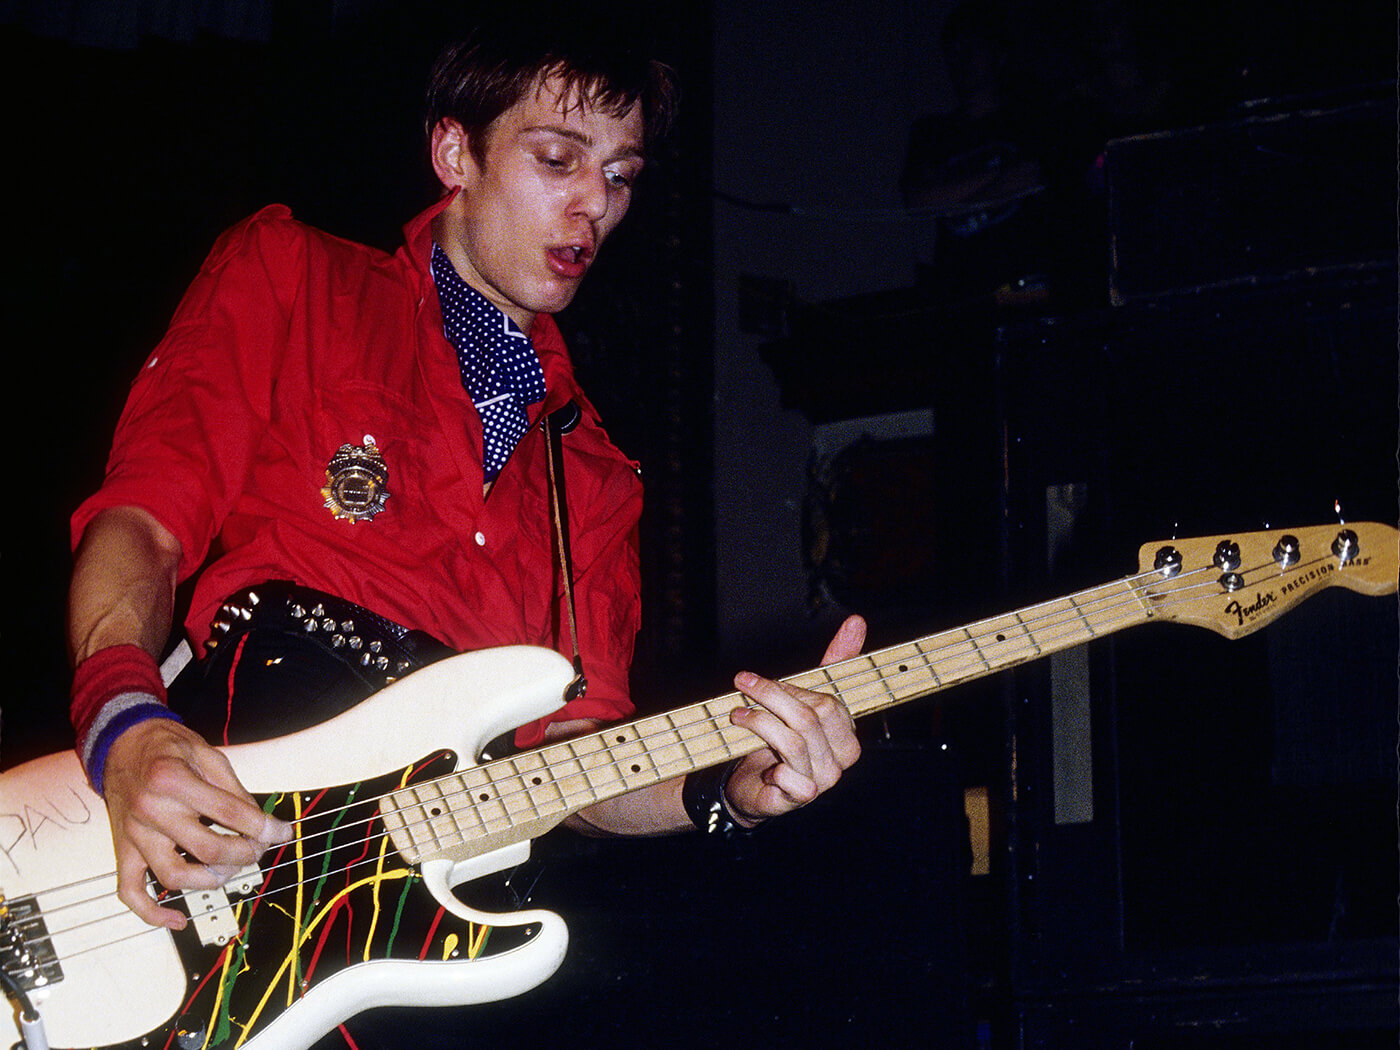 Paul Simonon of The Clash performing with a Fender Precision Bass in 1970, photo by Larry Hulst/Michael Ochs Archives via Getty Images